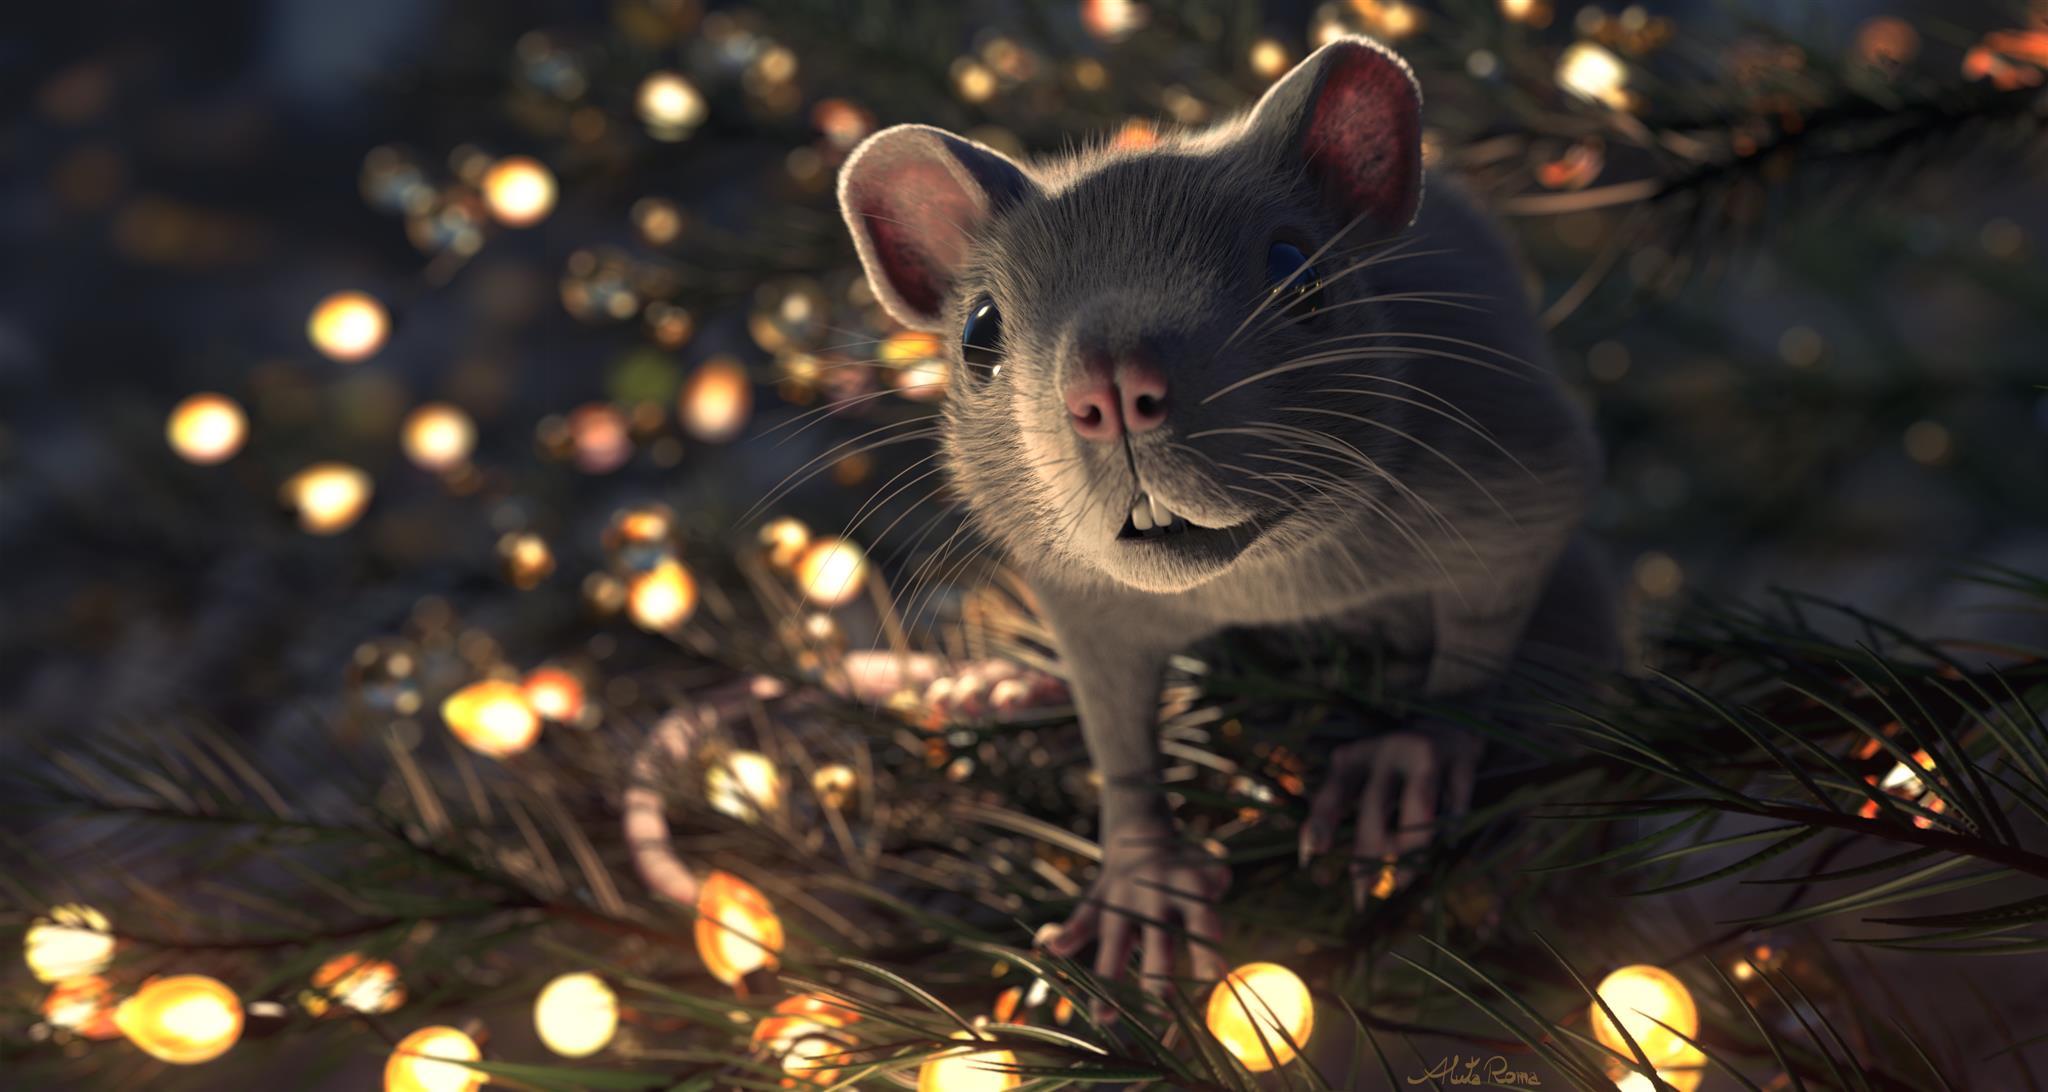 d houdini mantra zbrush after effects Pine Rat Aluta Roma